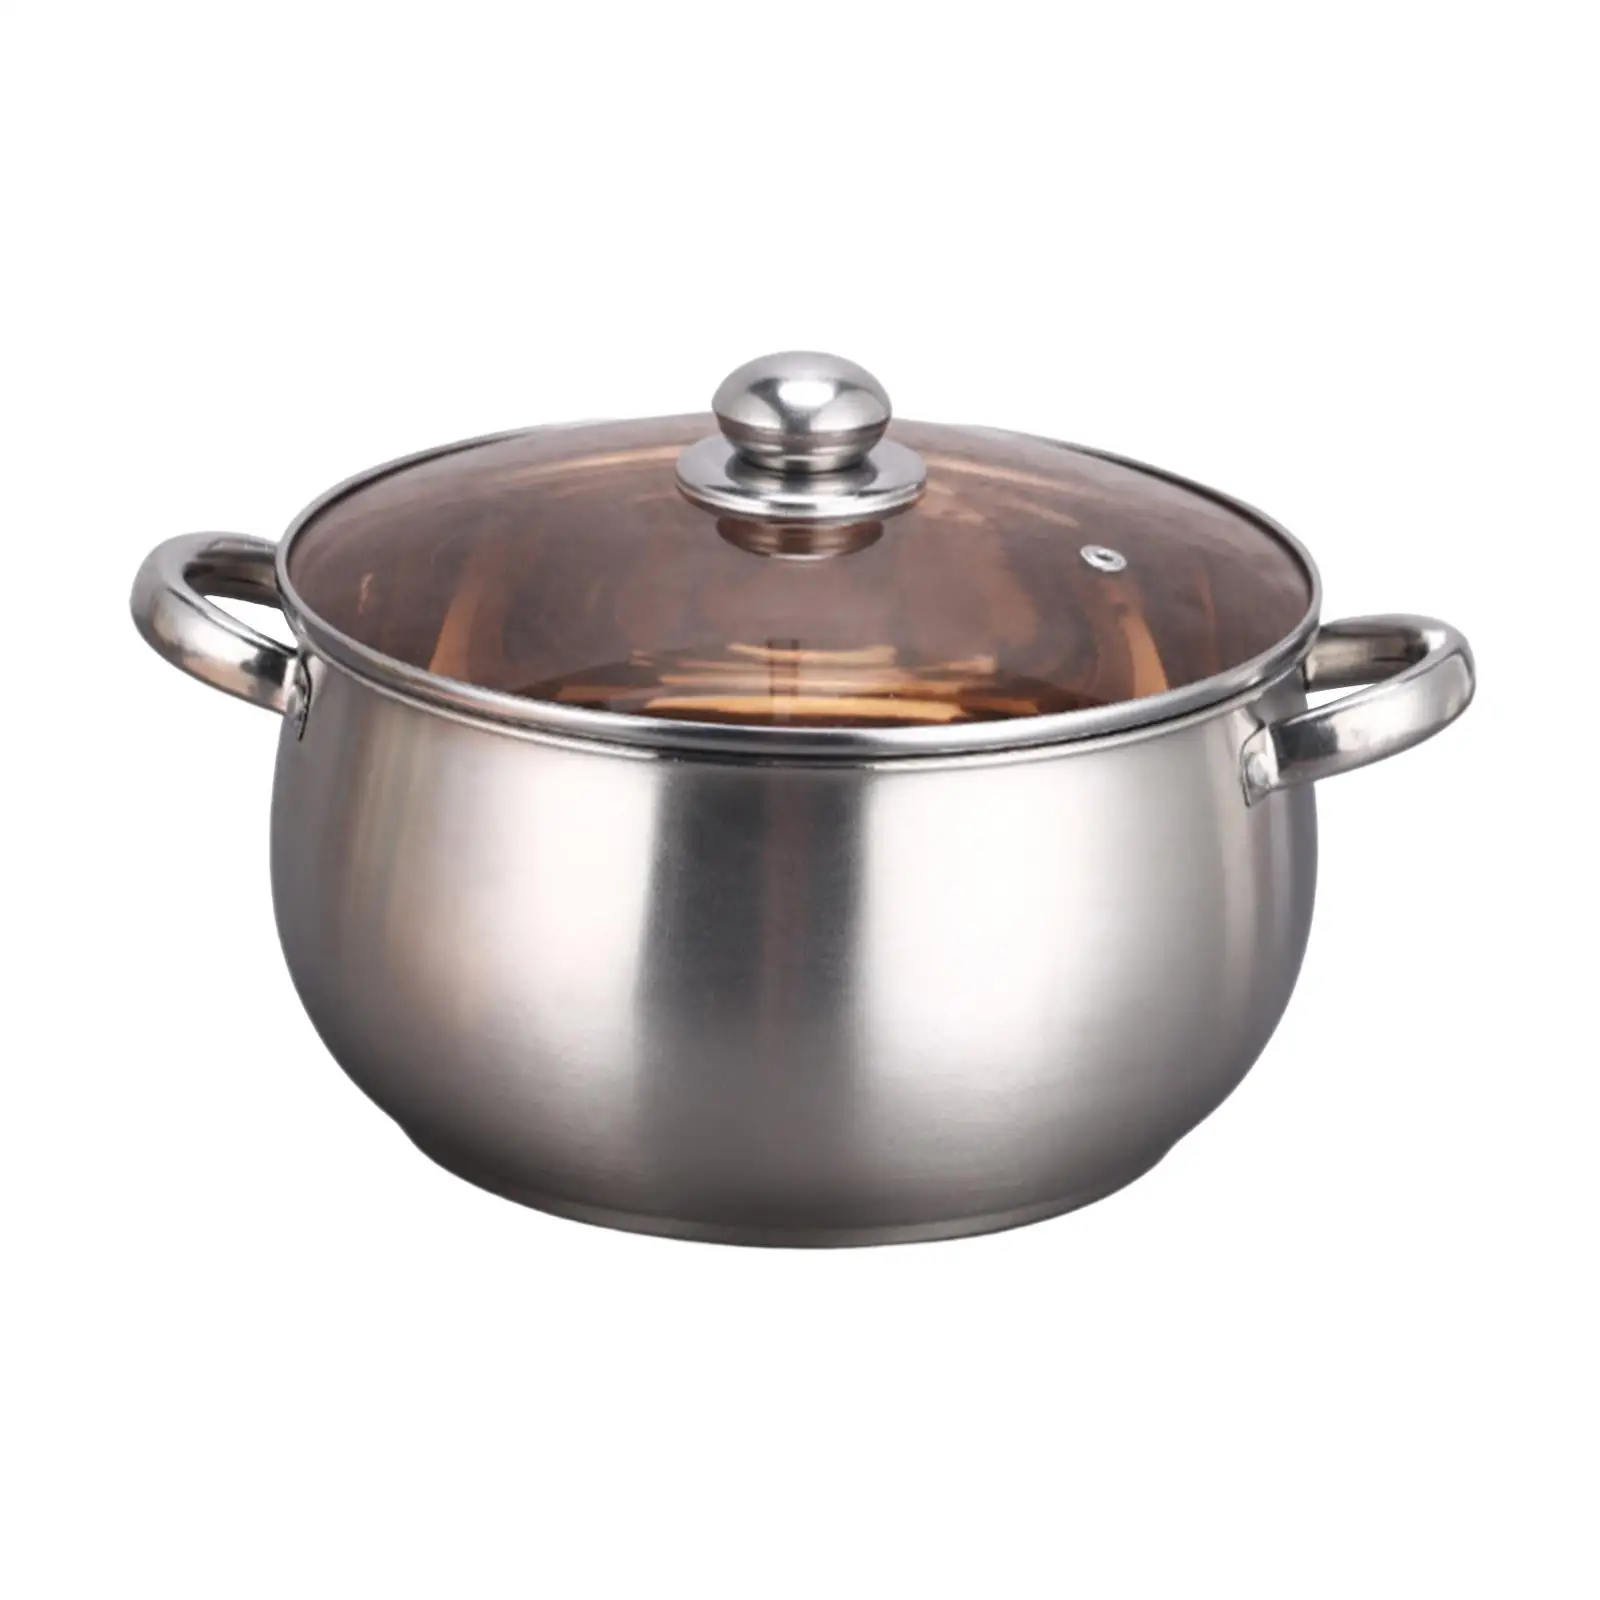 Stainless Steel Stockpot Suitable for All Stoves Dual Handle Kitchen Cooking Pot for Cooking Eggs Warming Milk Vegetables Sauce